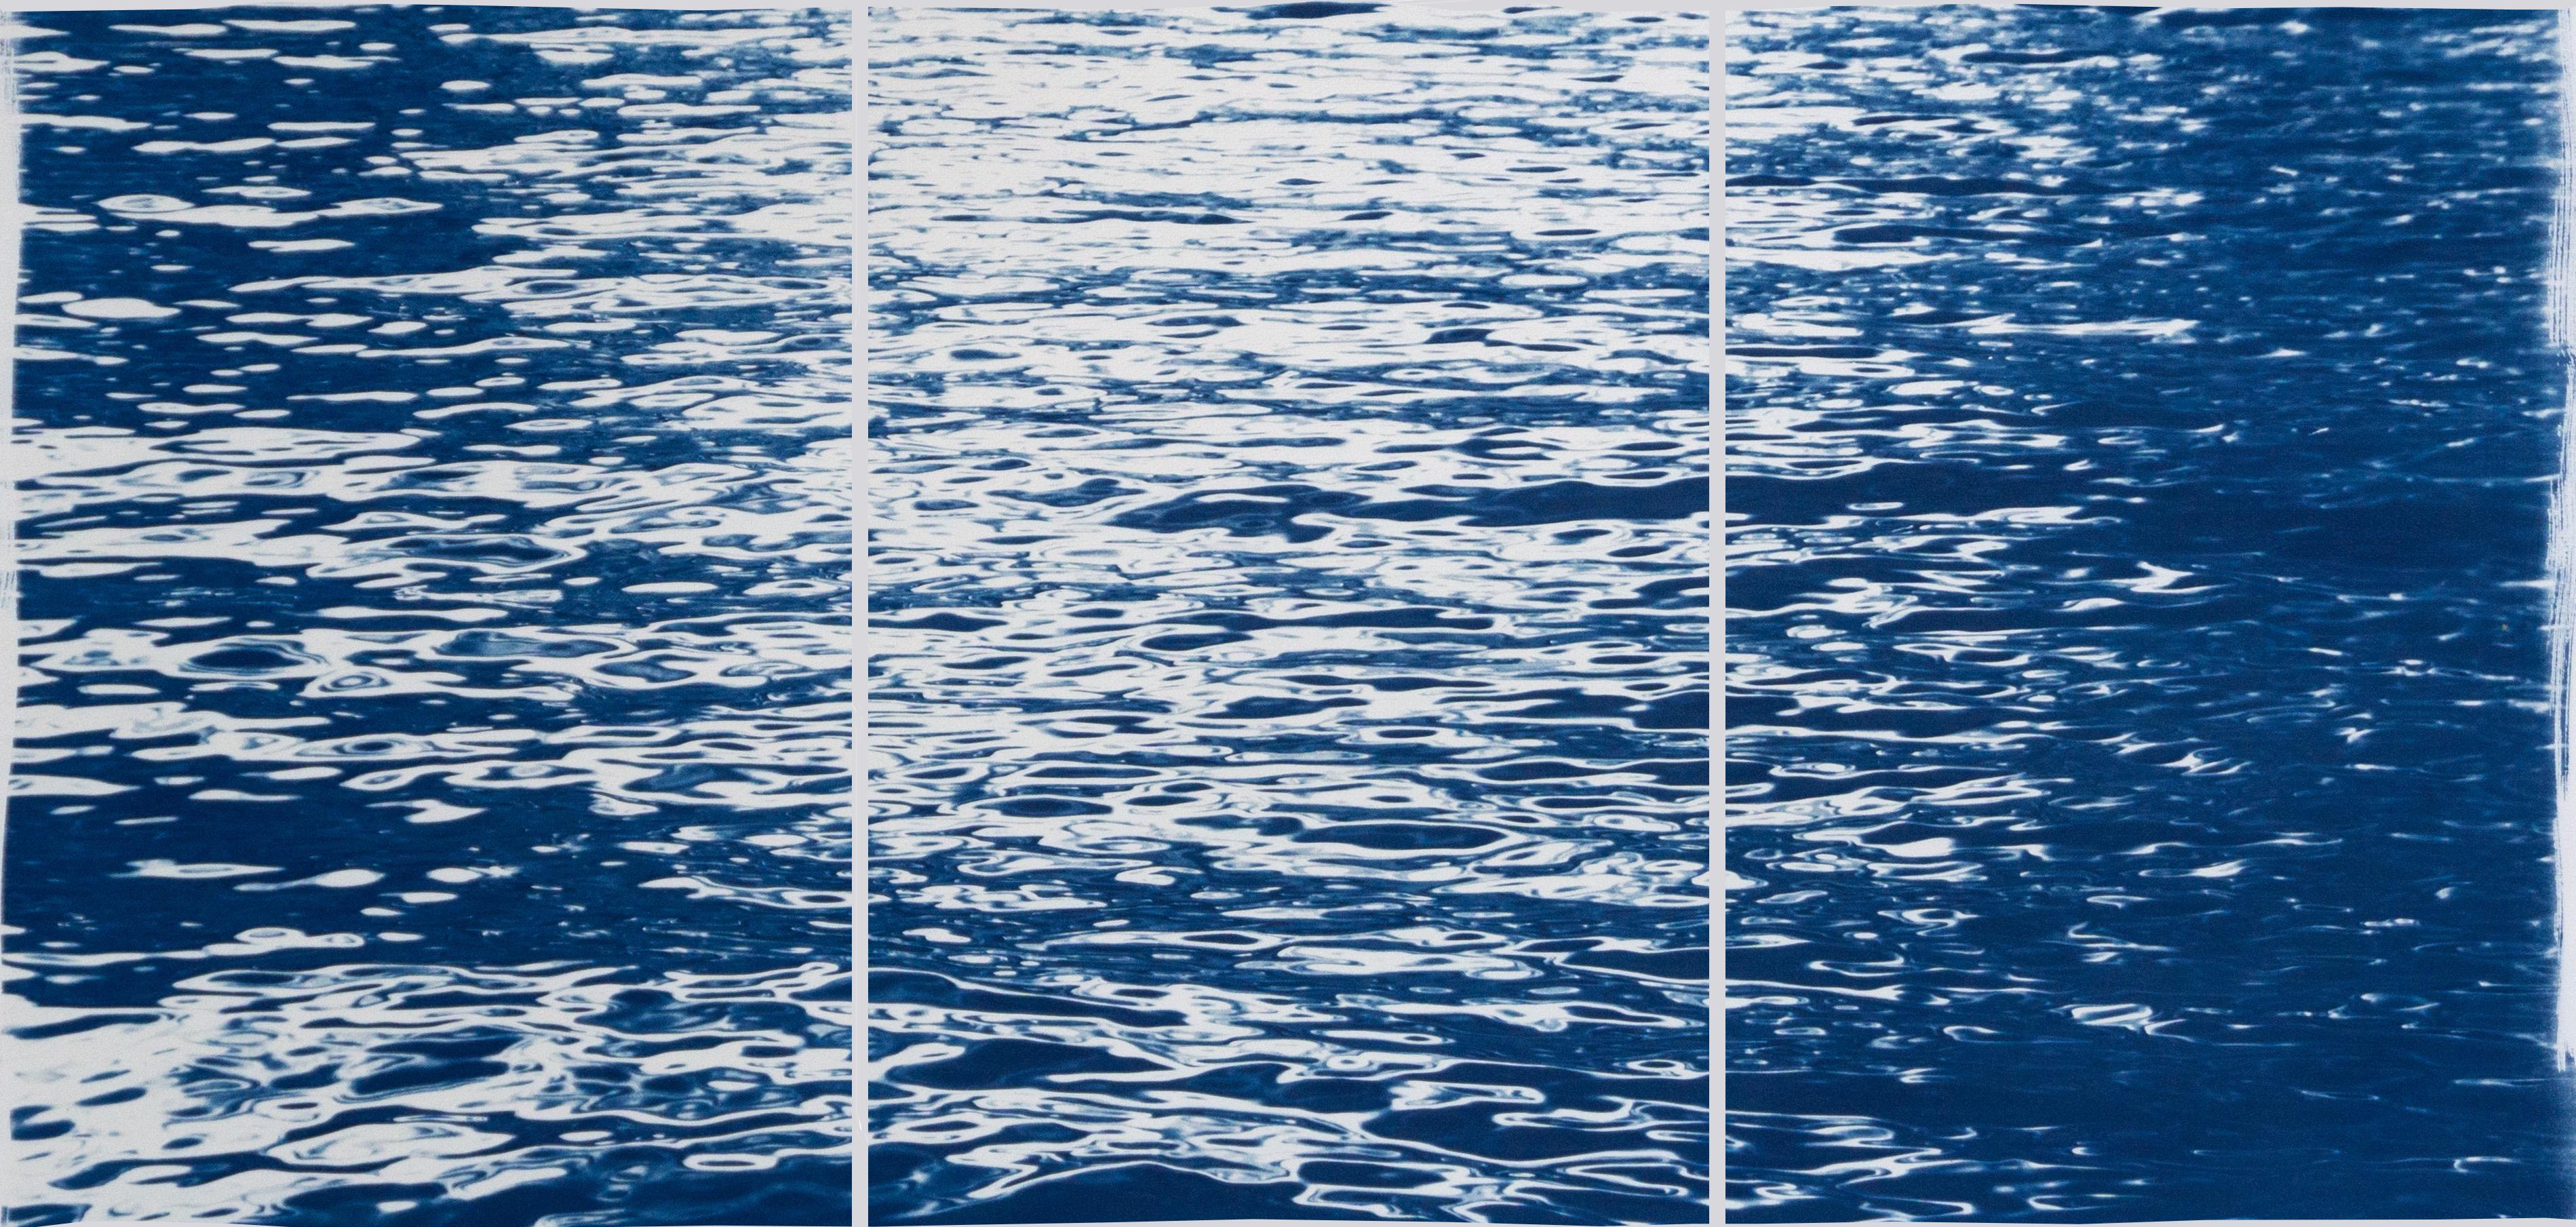 Moonlight Ripples over Lake Como, Nautical Cyanotype Triptych of Moving Water